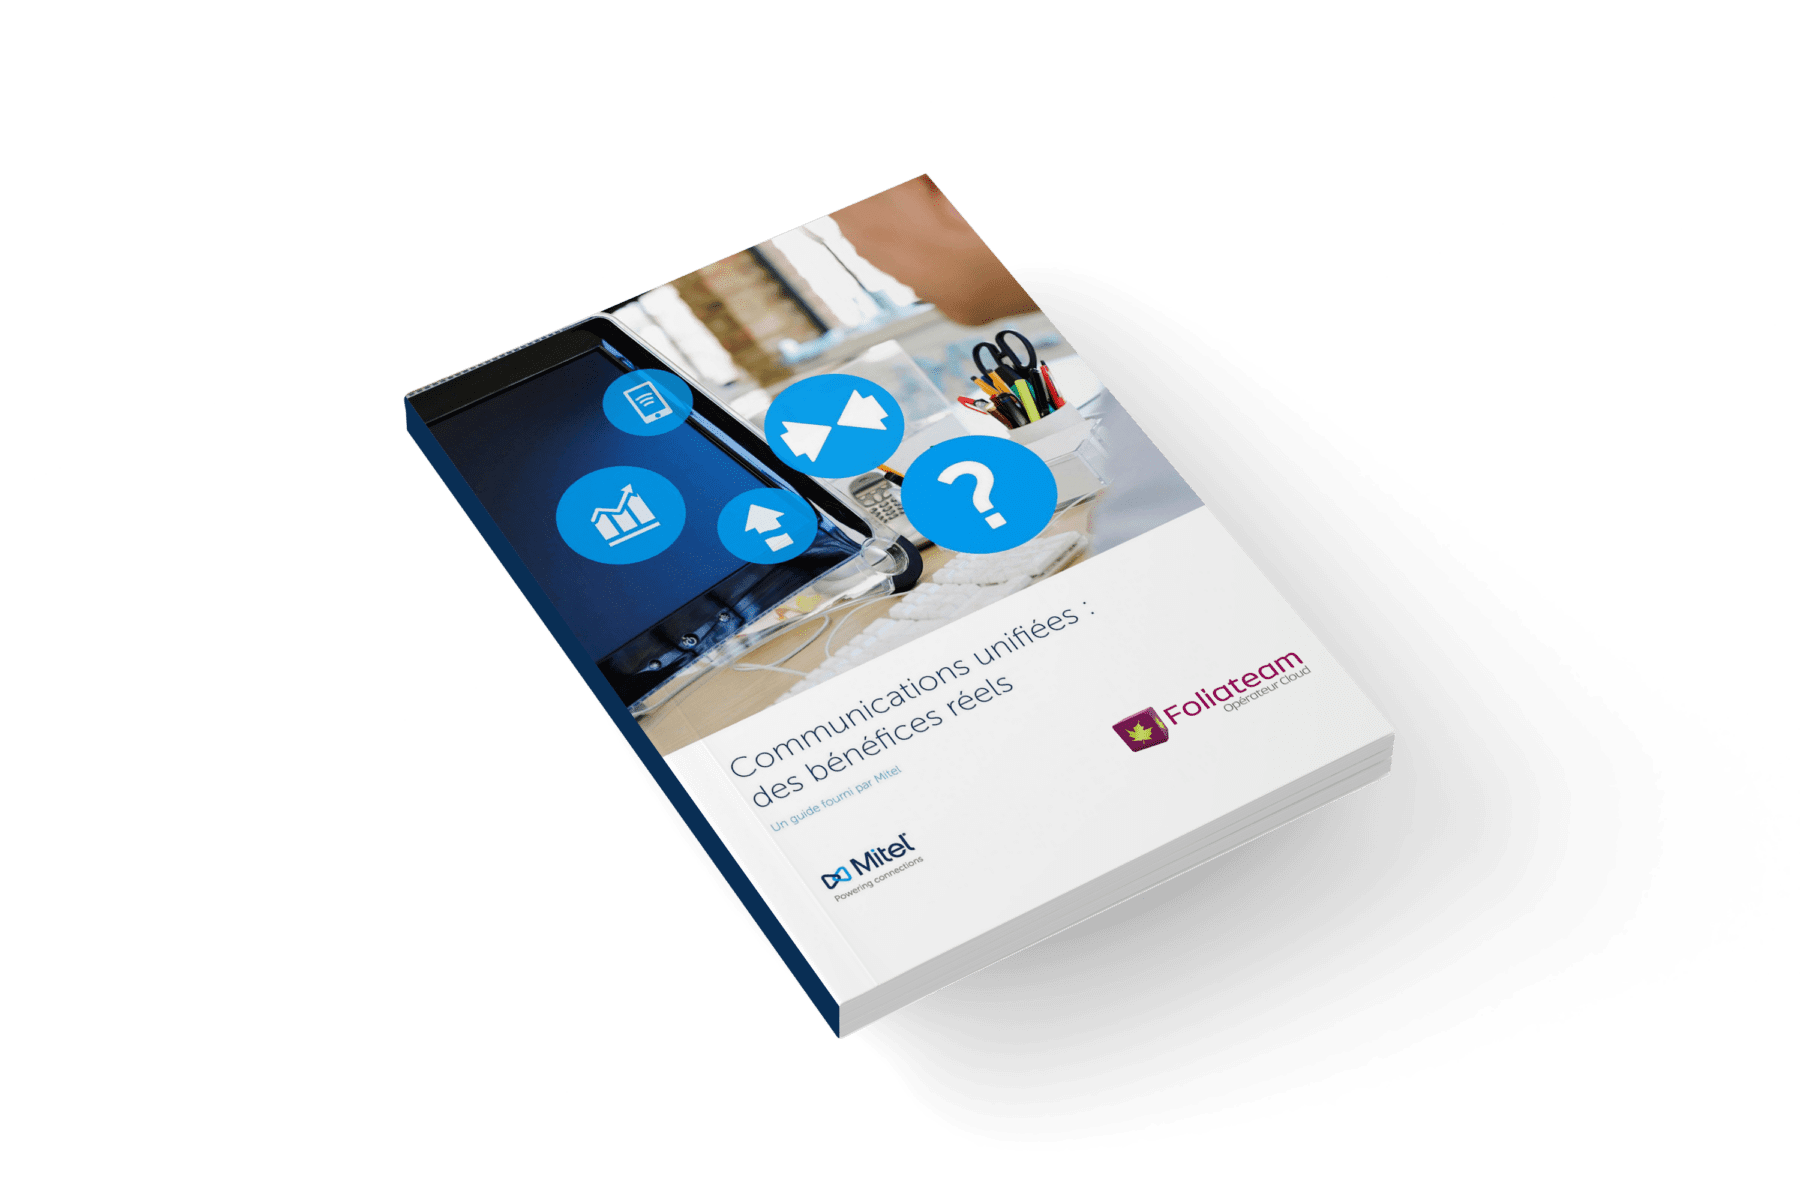 Communications unifiees des benefices reels - e-book MITEL